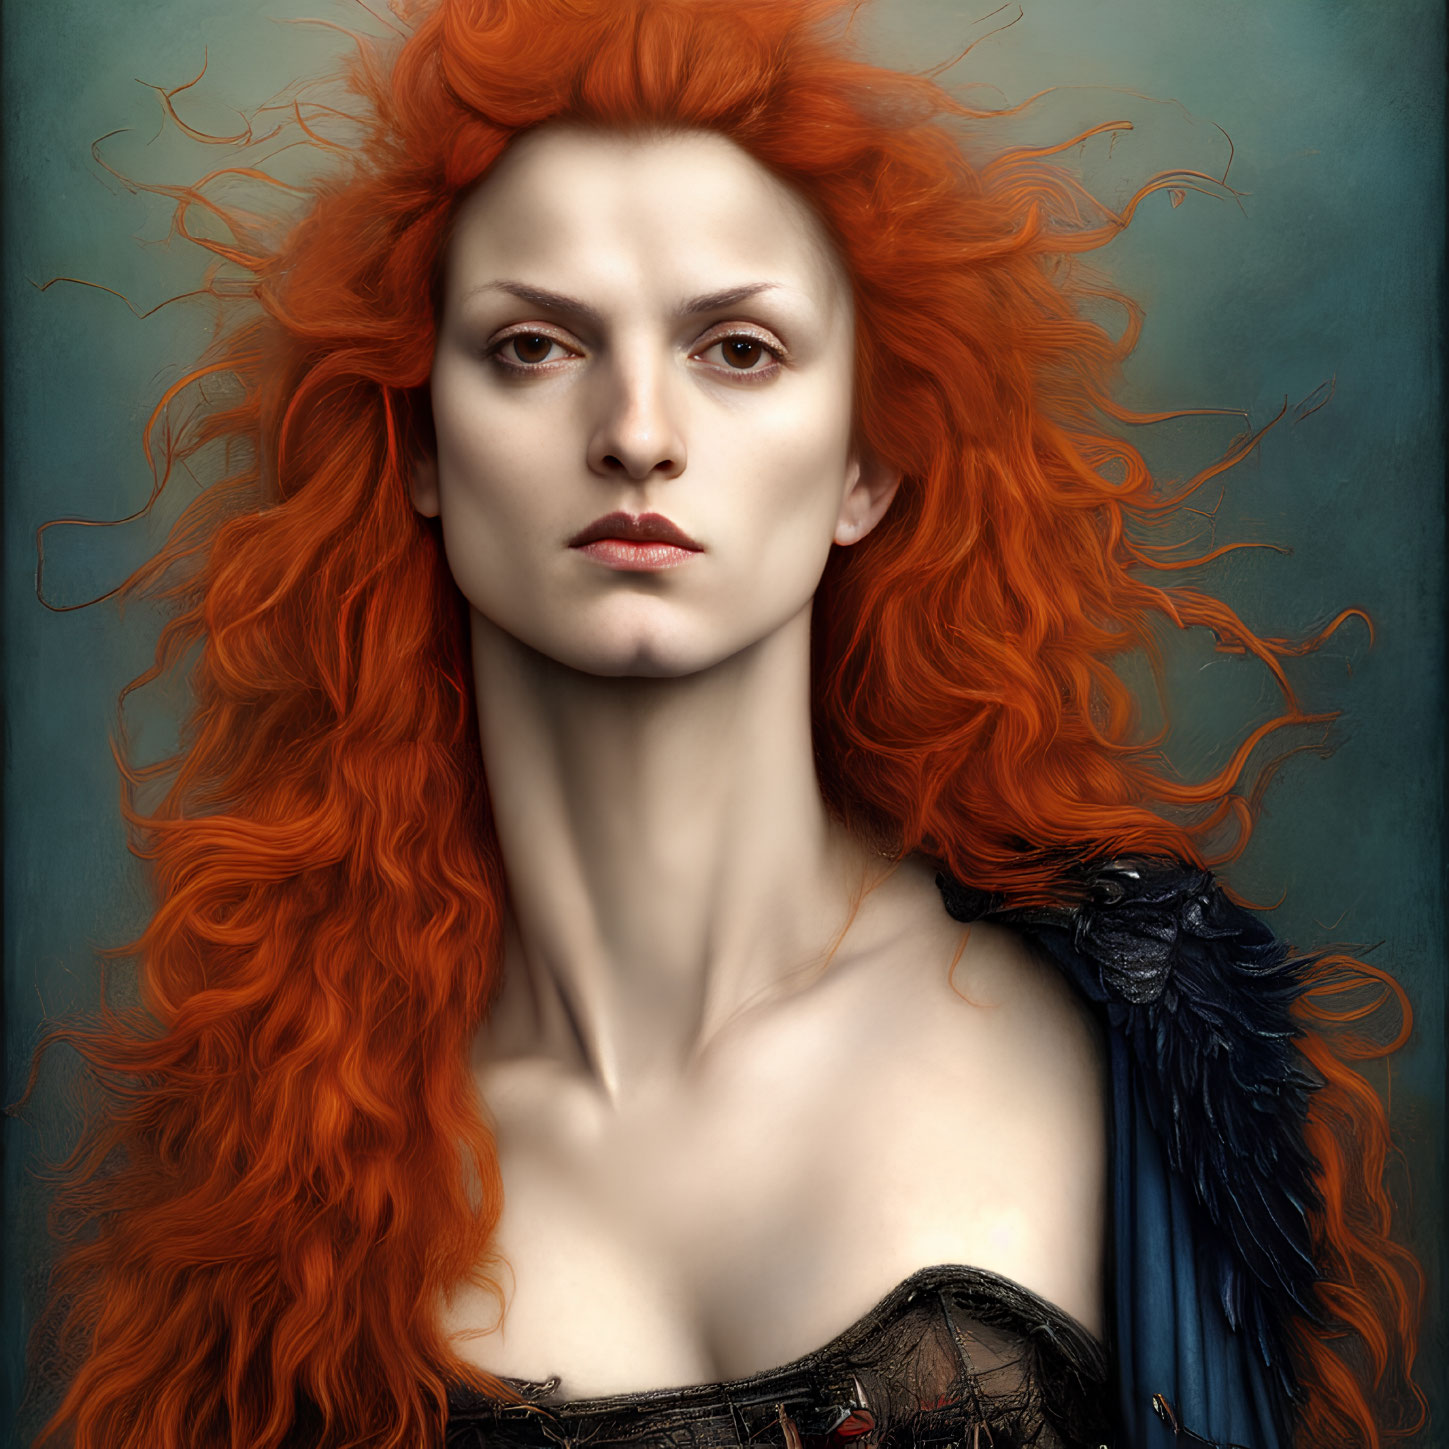 Portrait of Woman with Vivid Red Hair and Dark Feathered Garment